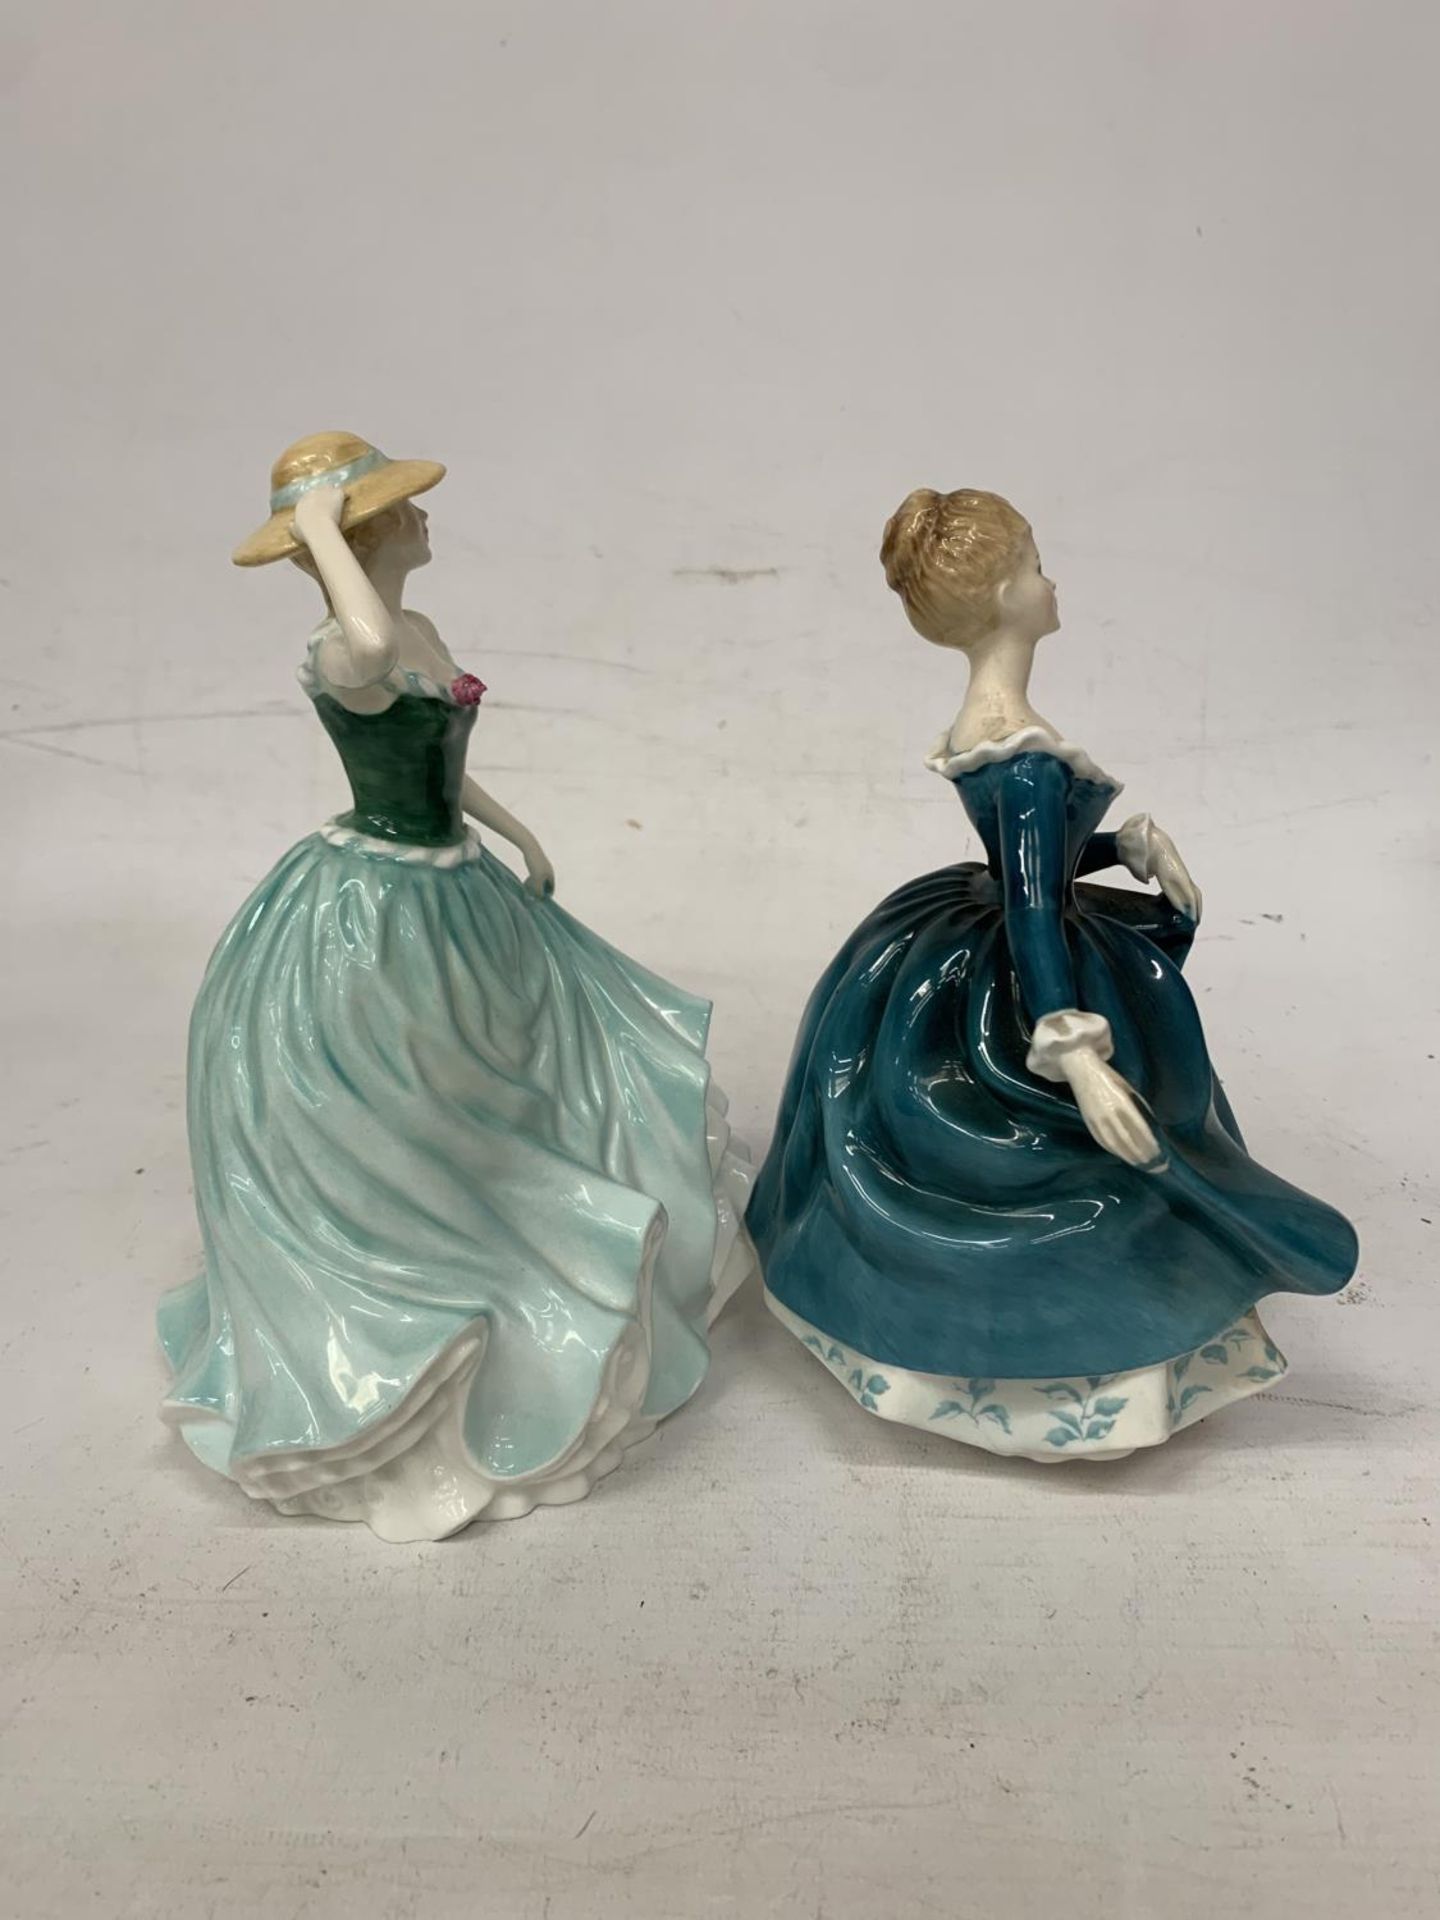 TWO ROYAL DOULTON FIGURES "JANINE" HN 2461 AND "EMILY" HN 4093 - Image 2 of 4